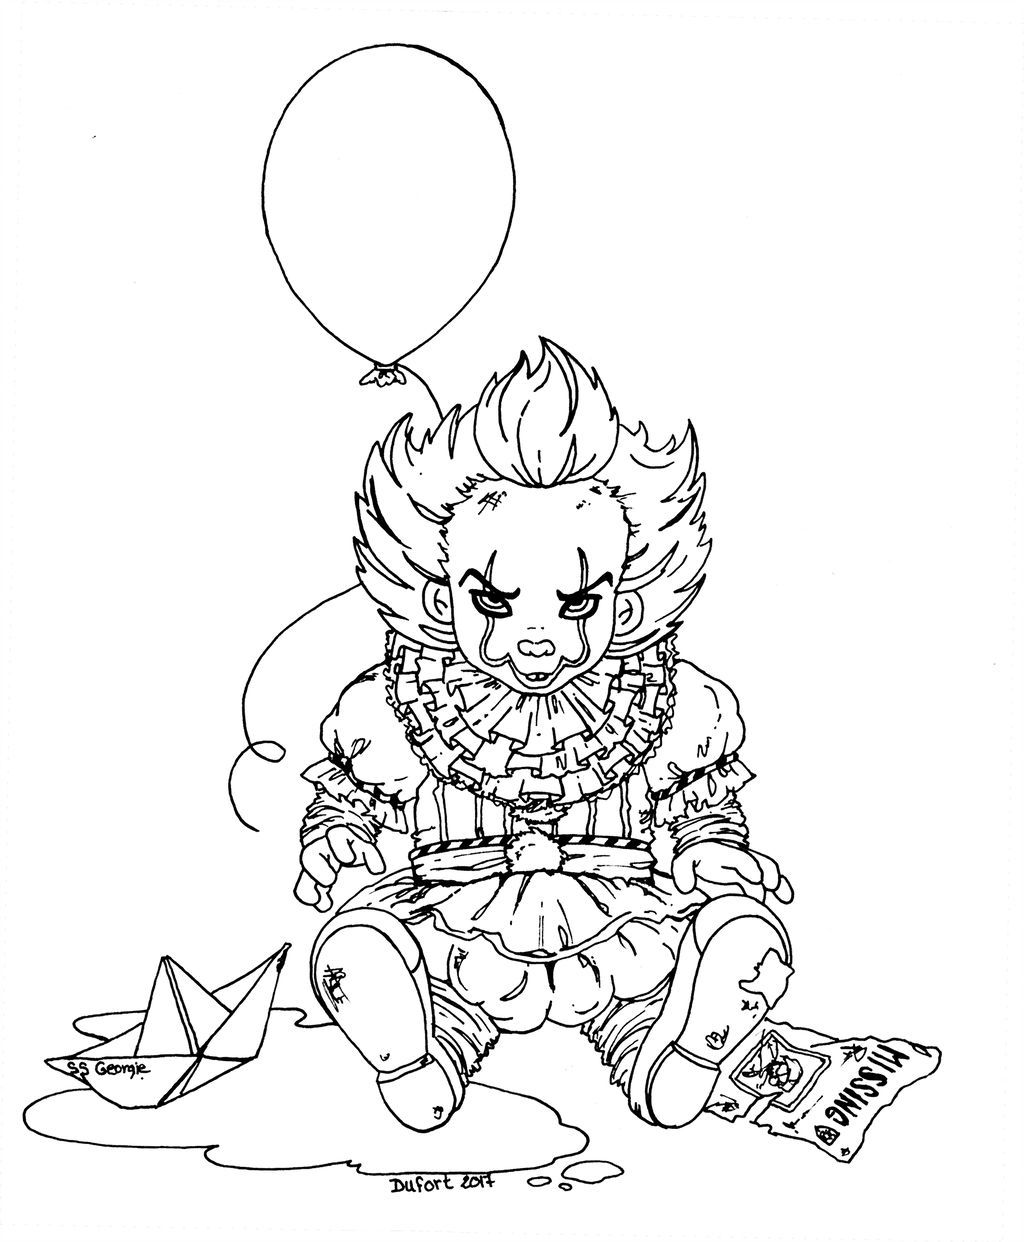 Pennywise Coloring Pages For Kids